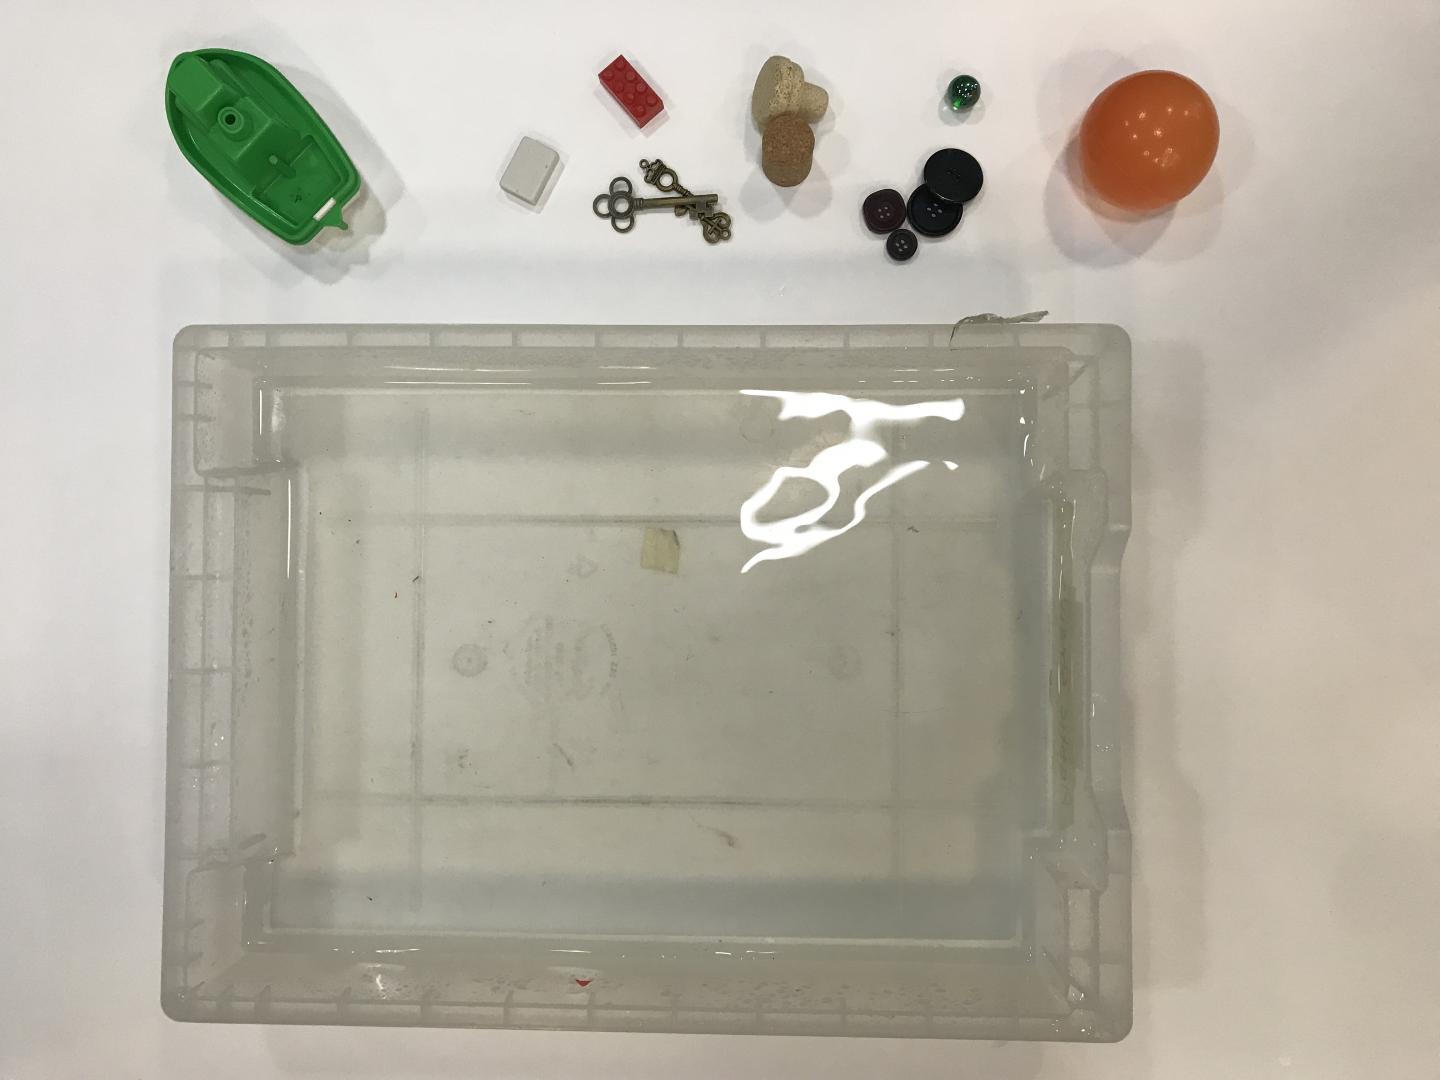 a tray of water with different objects including a toy boat, keys and corks nearby. 